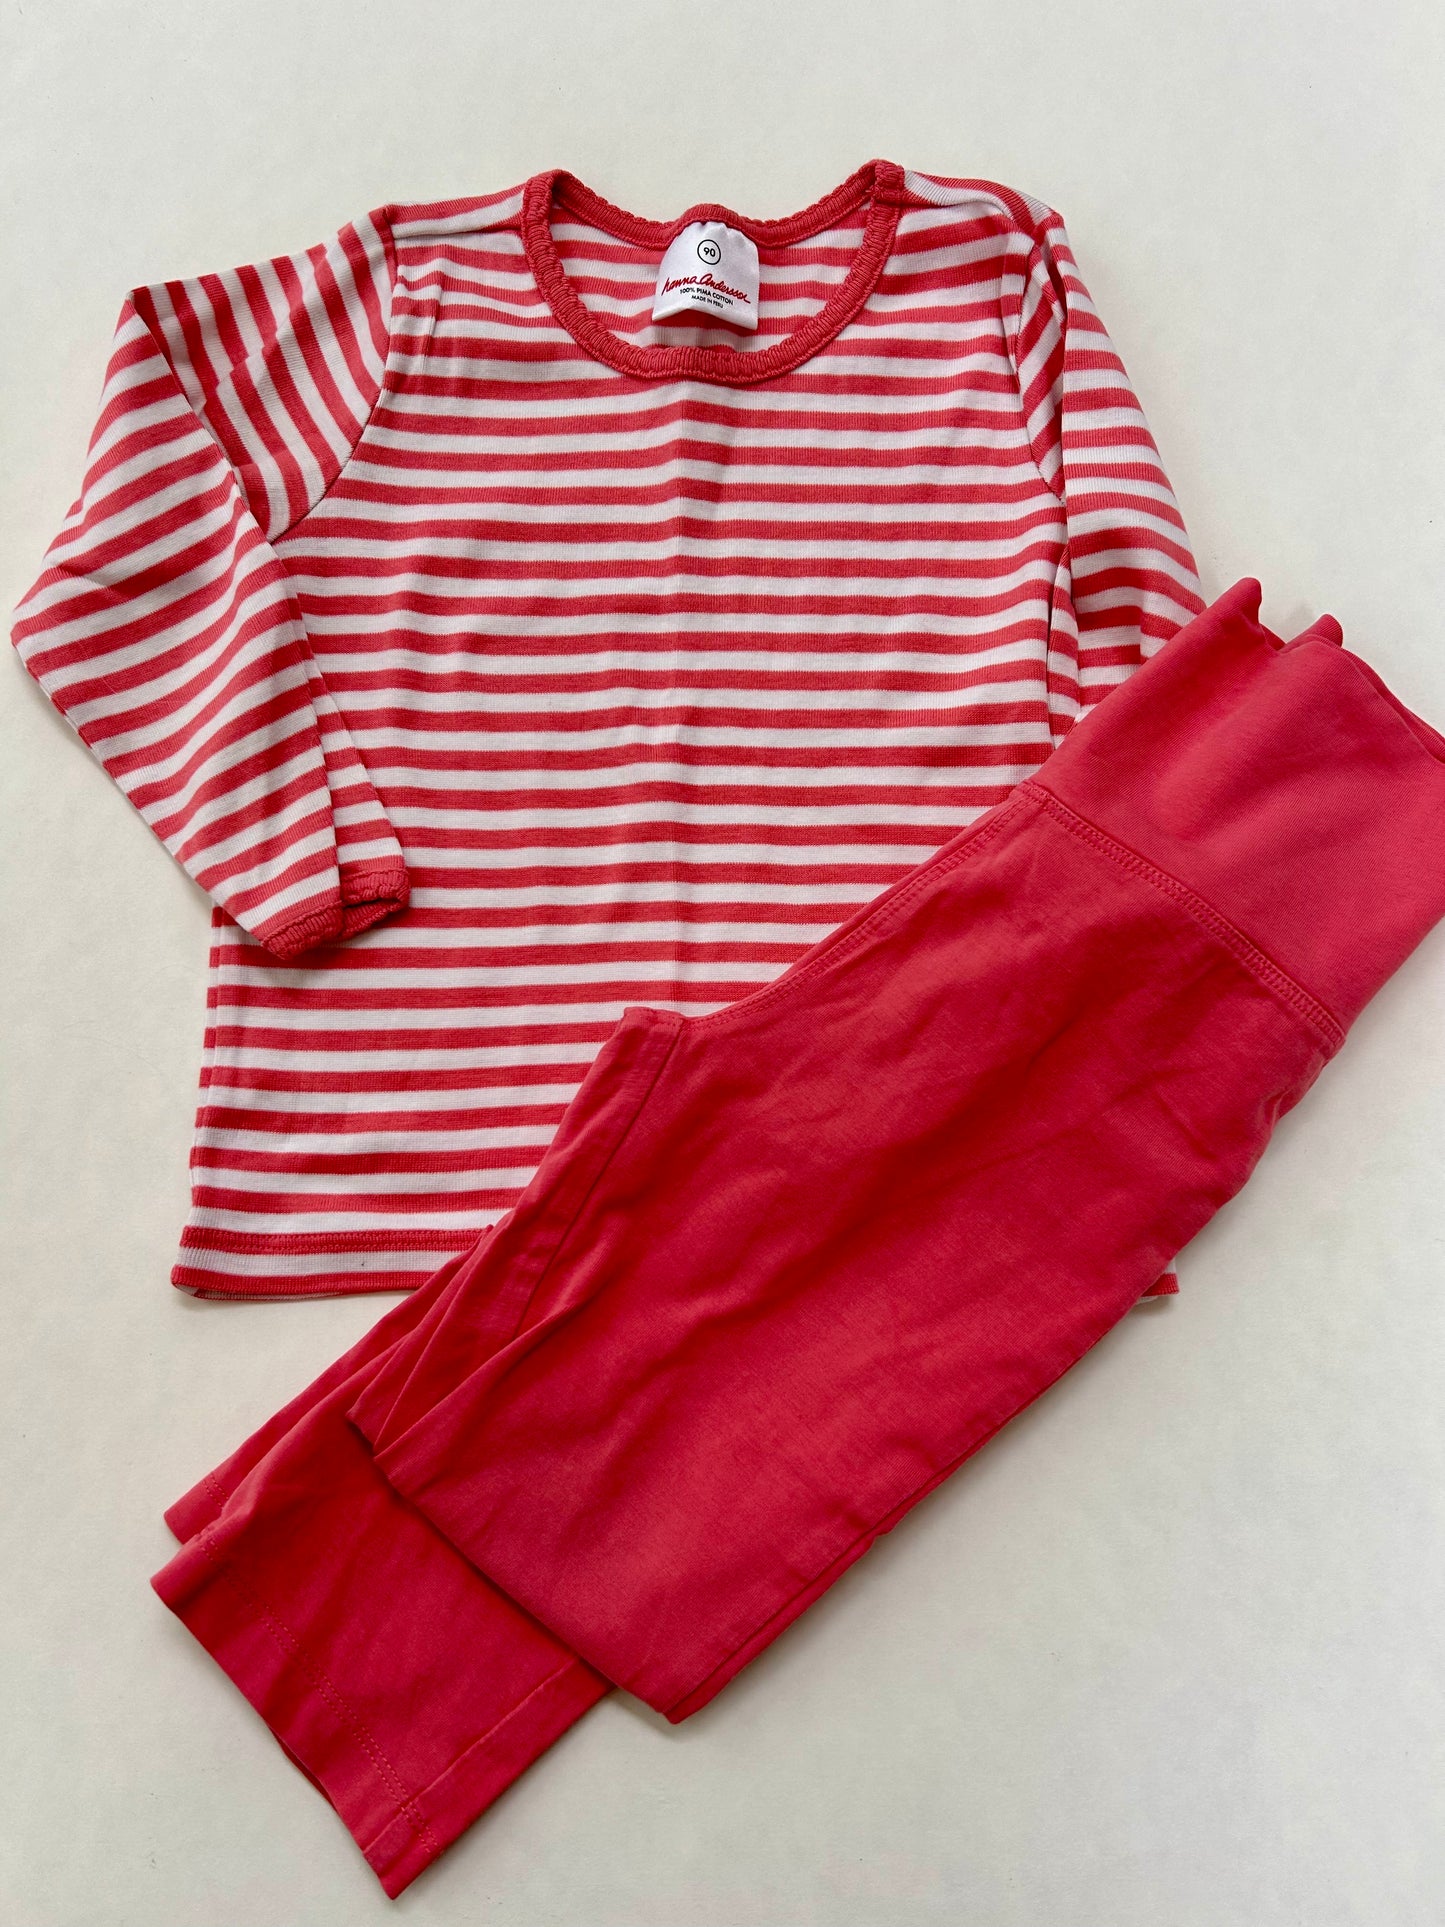 Girls size 90 (3T) pink and white striped outfit